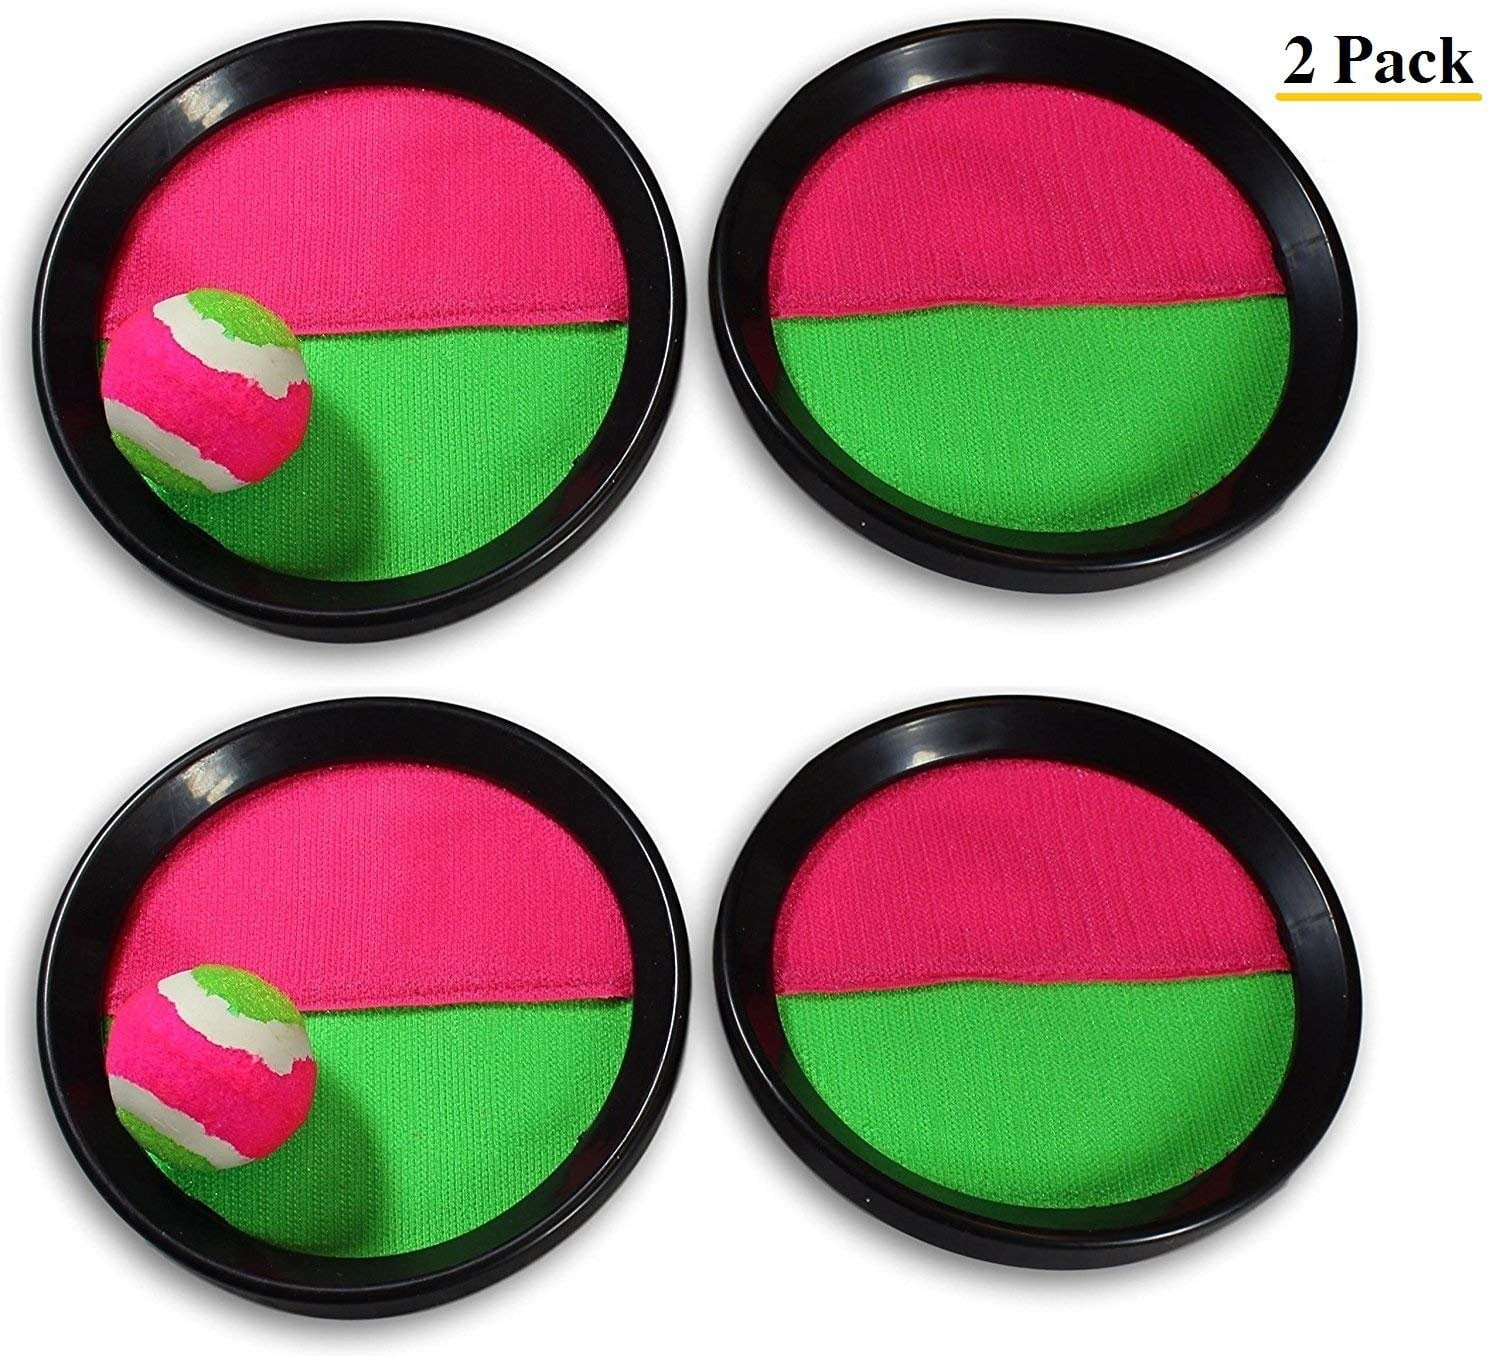 2 Pack Throw Catch Bat Ball Game Paddle Catch Toss and Catch Ball Game Set 